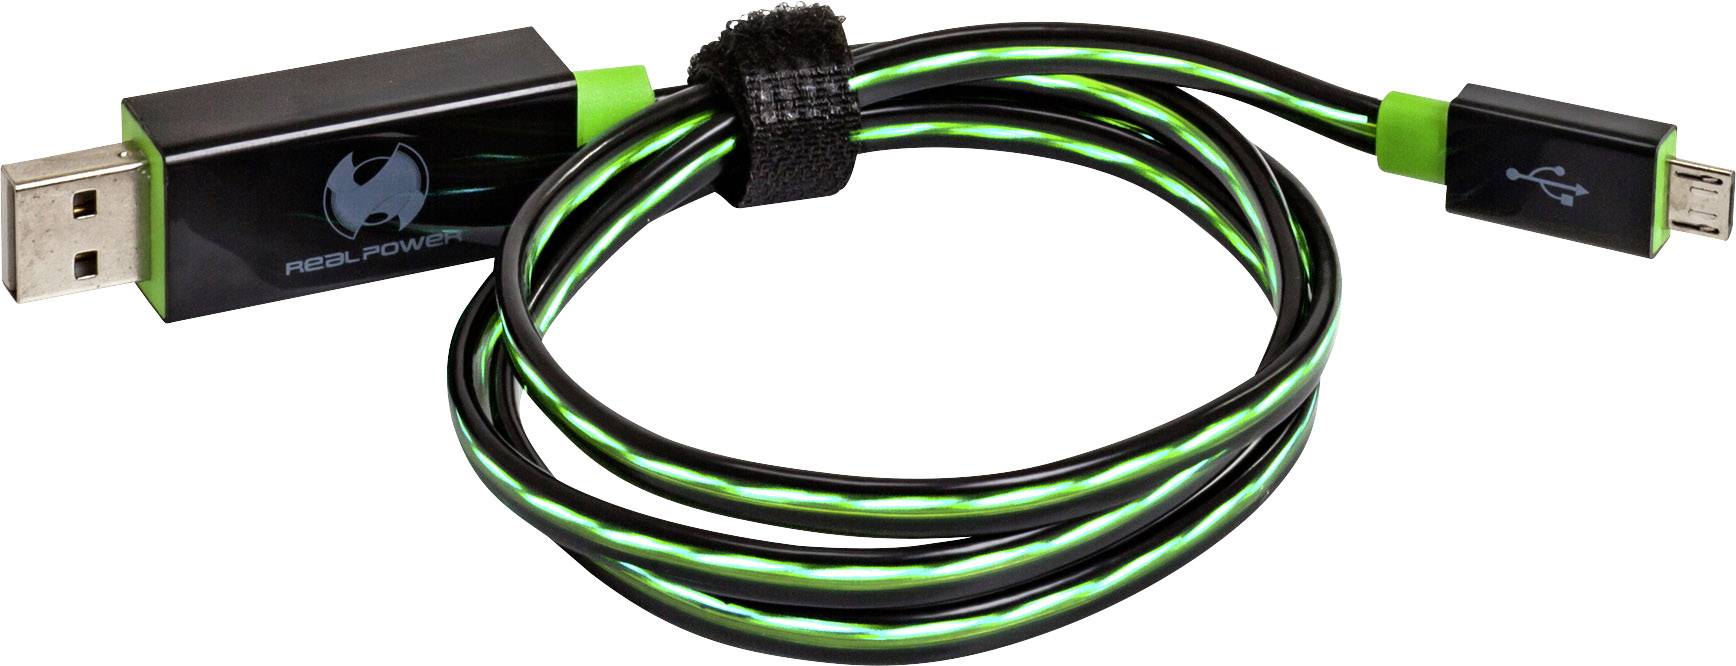 REALPOWER Floating micro USB Cable green